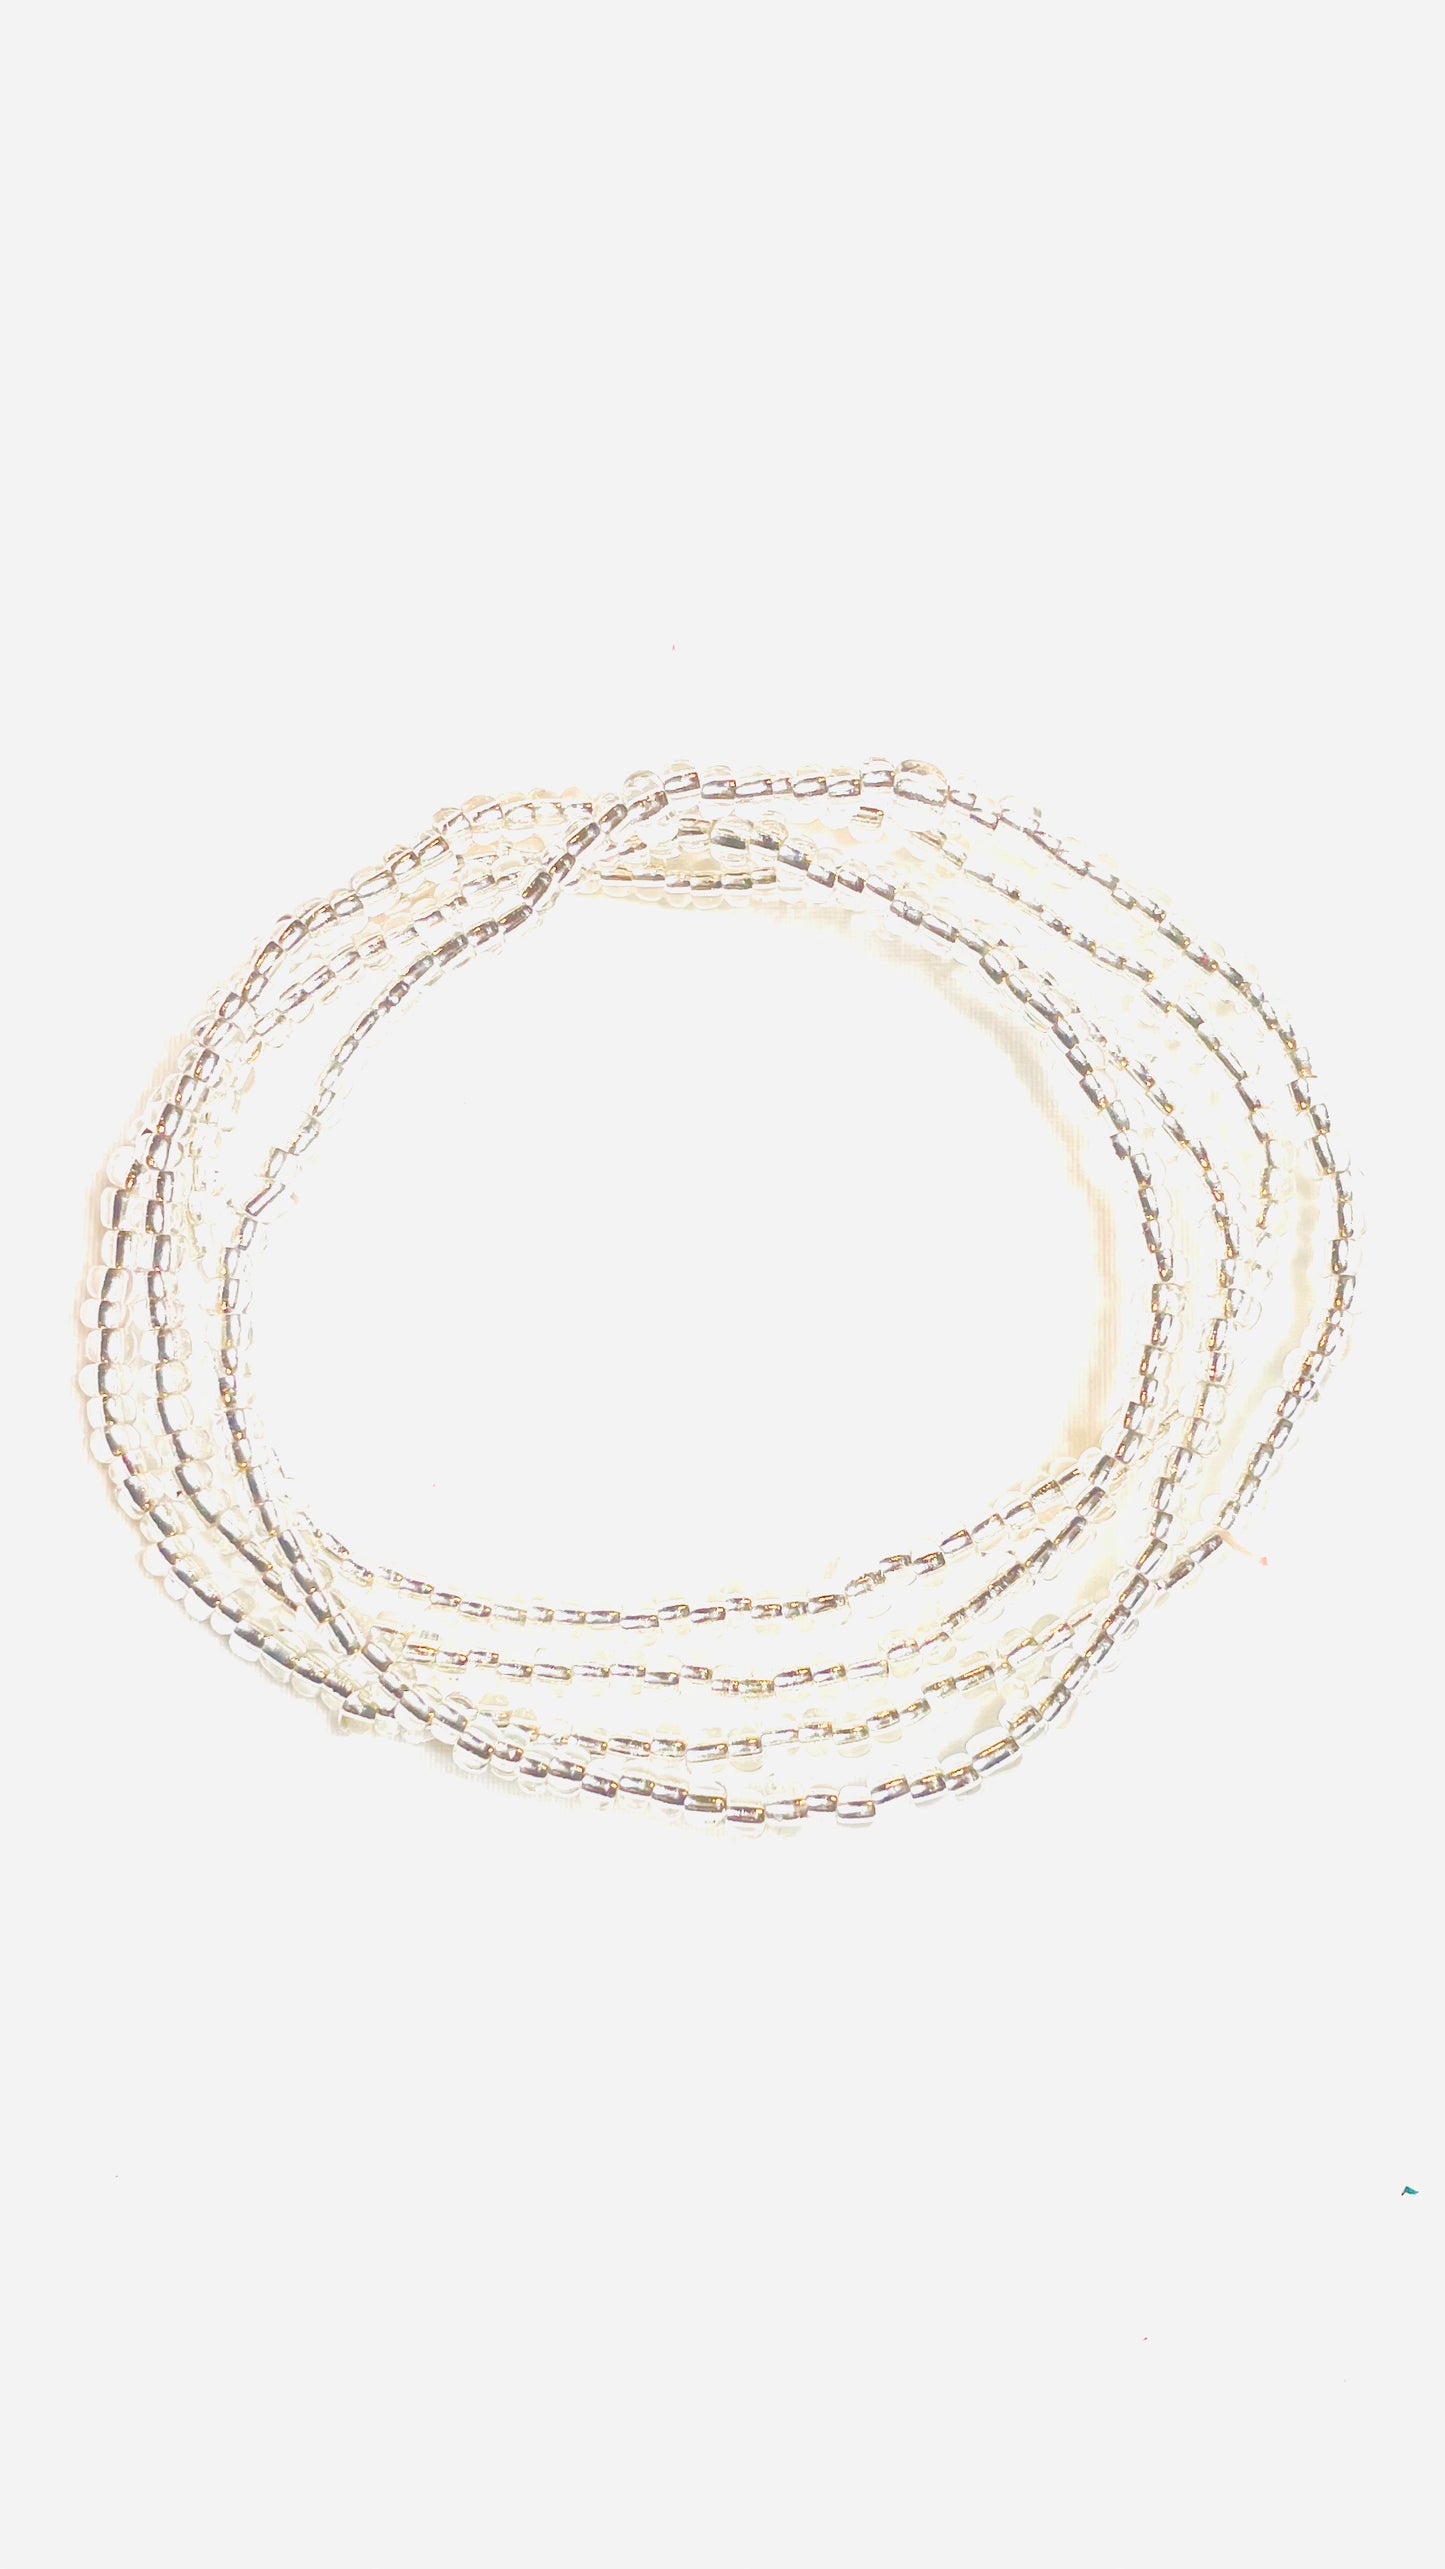 Waist Beads Extra stretchy (Small-plus Size)